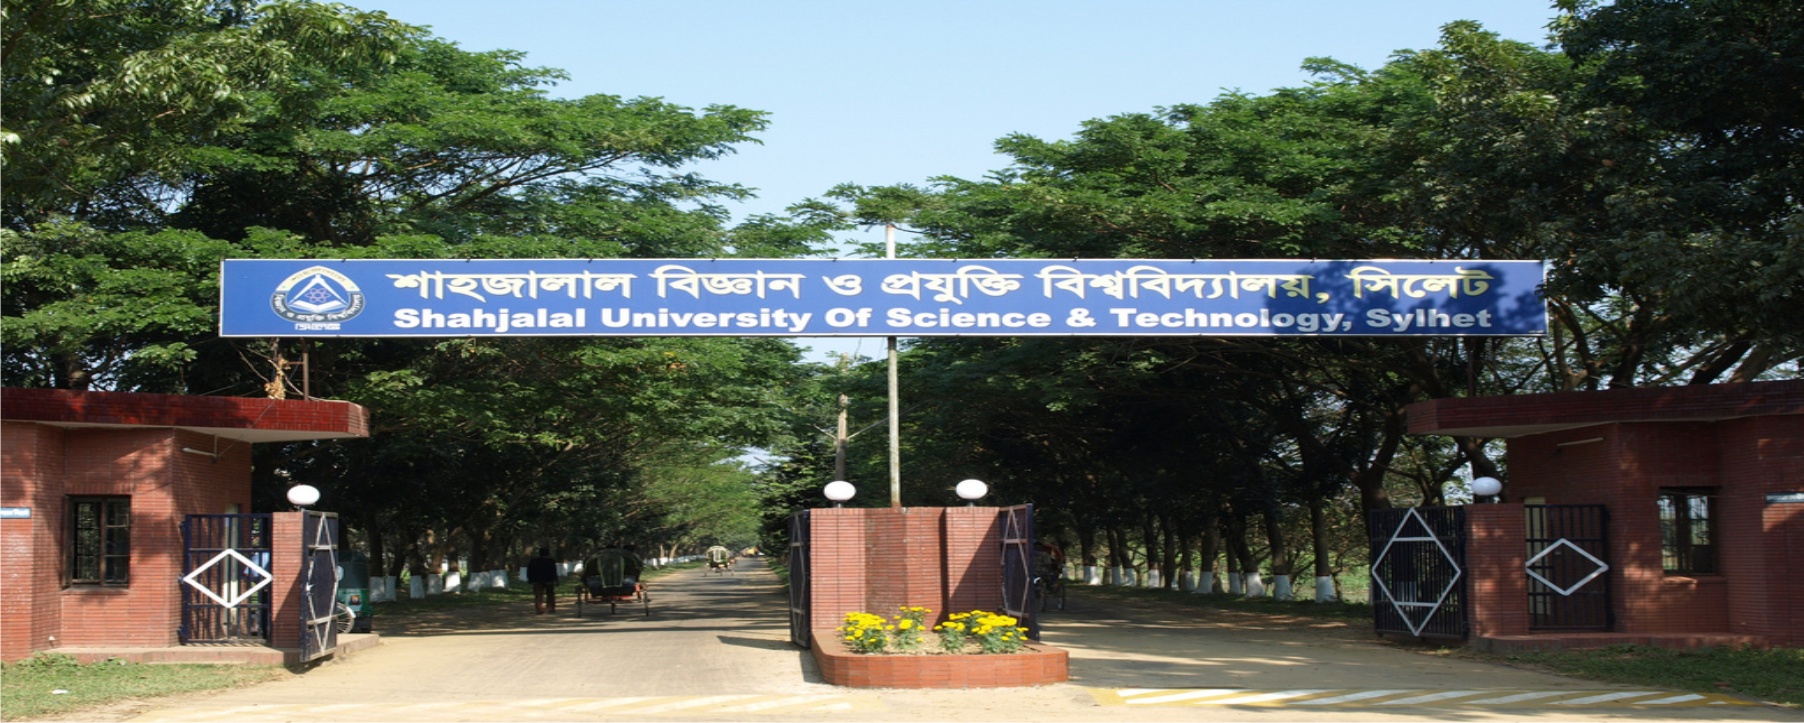 Shahjalal University of Science and Technology (SUST)